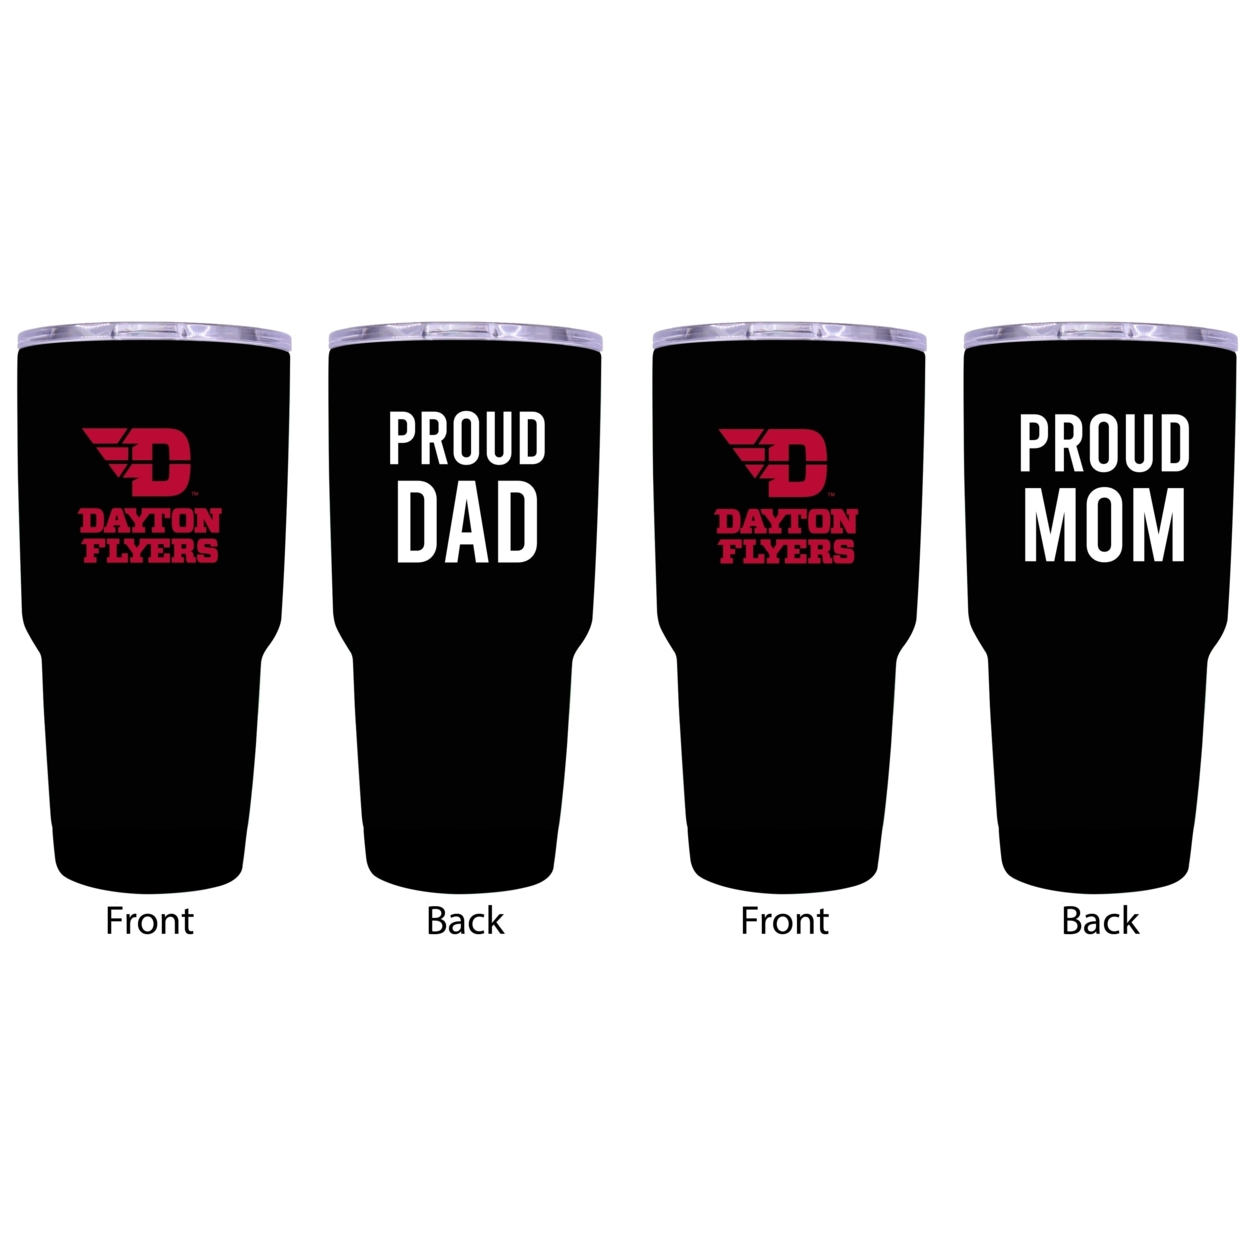 Dayton Flyers Proud Mom And Dad 24 Oz Insulated Stainless Steel Tumblers 2 Pack Black.